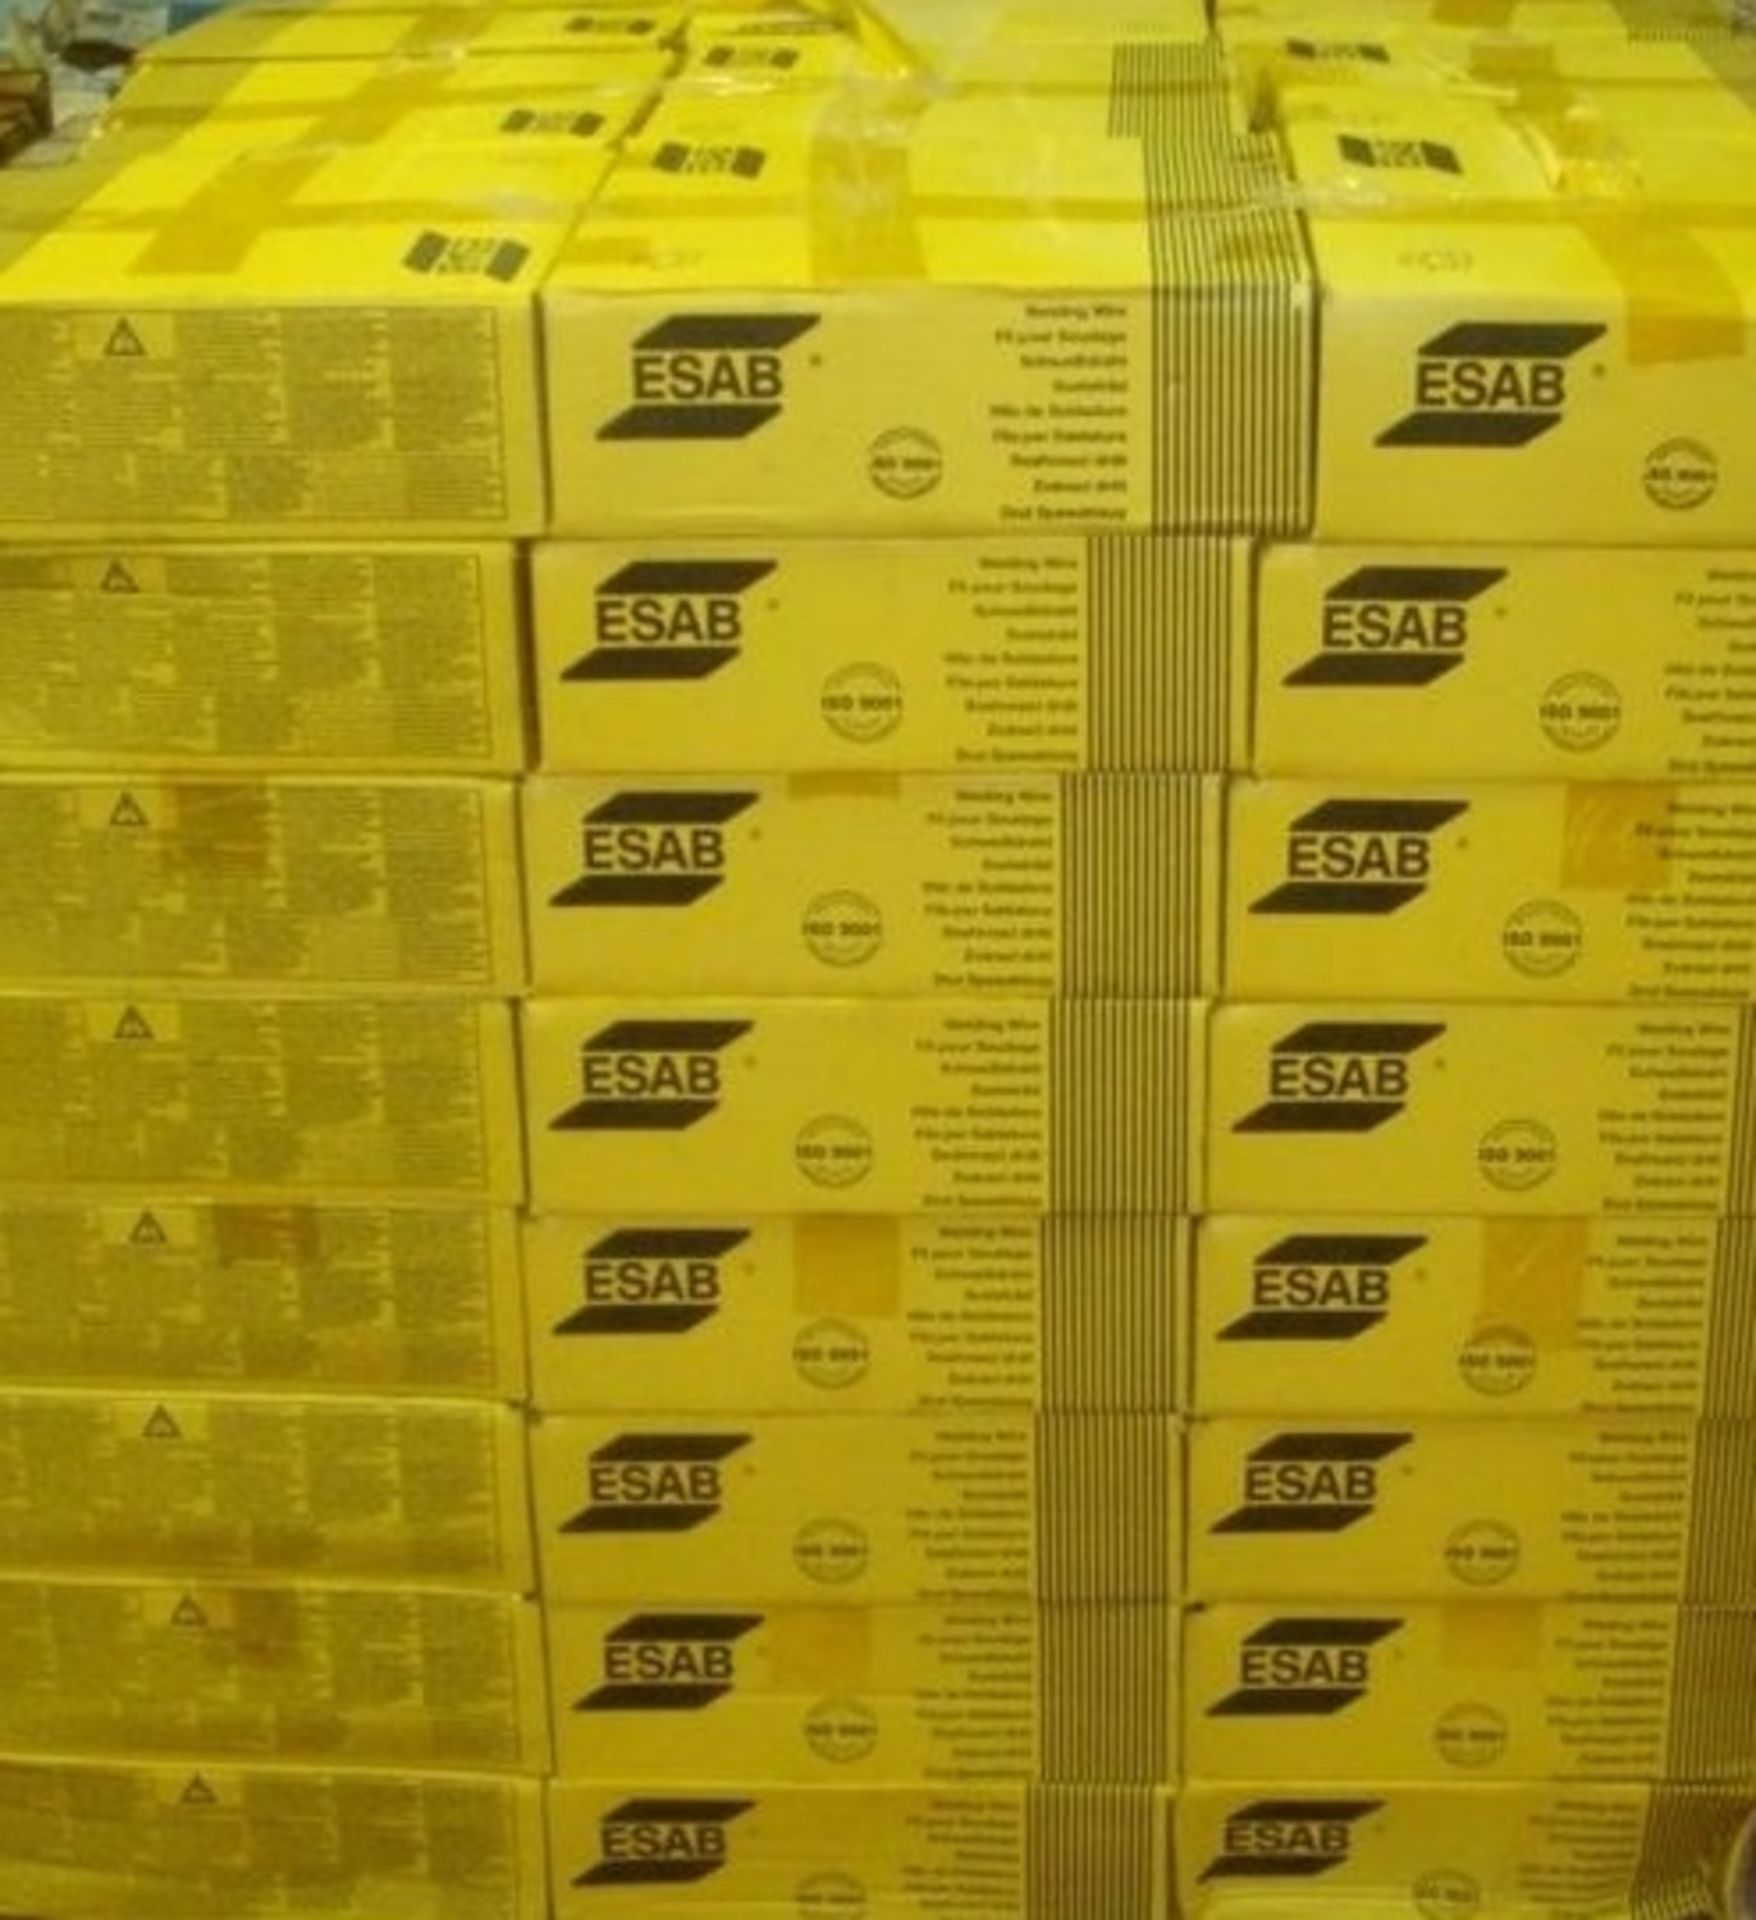 Lot of 16 boxes of Esab Welding Wire Coreshield 8 - 0.072" 25lbs X 16 (400lbs in lot)